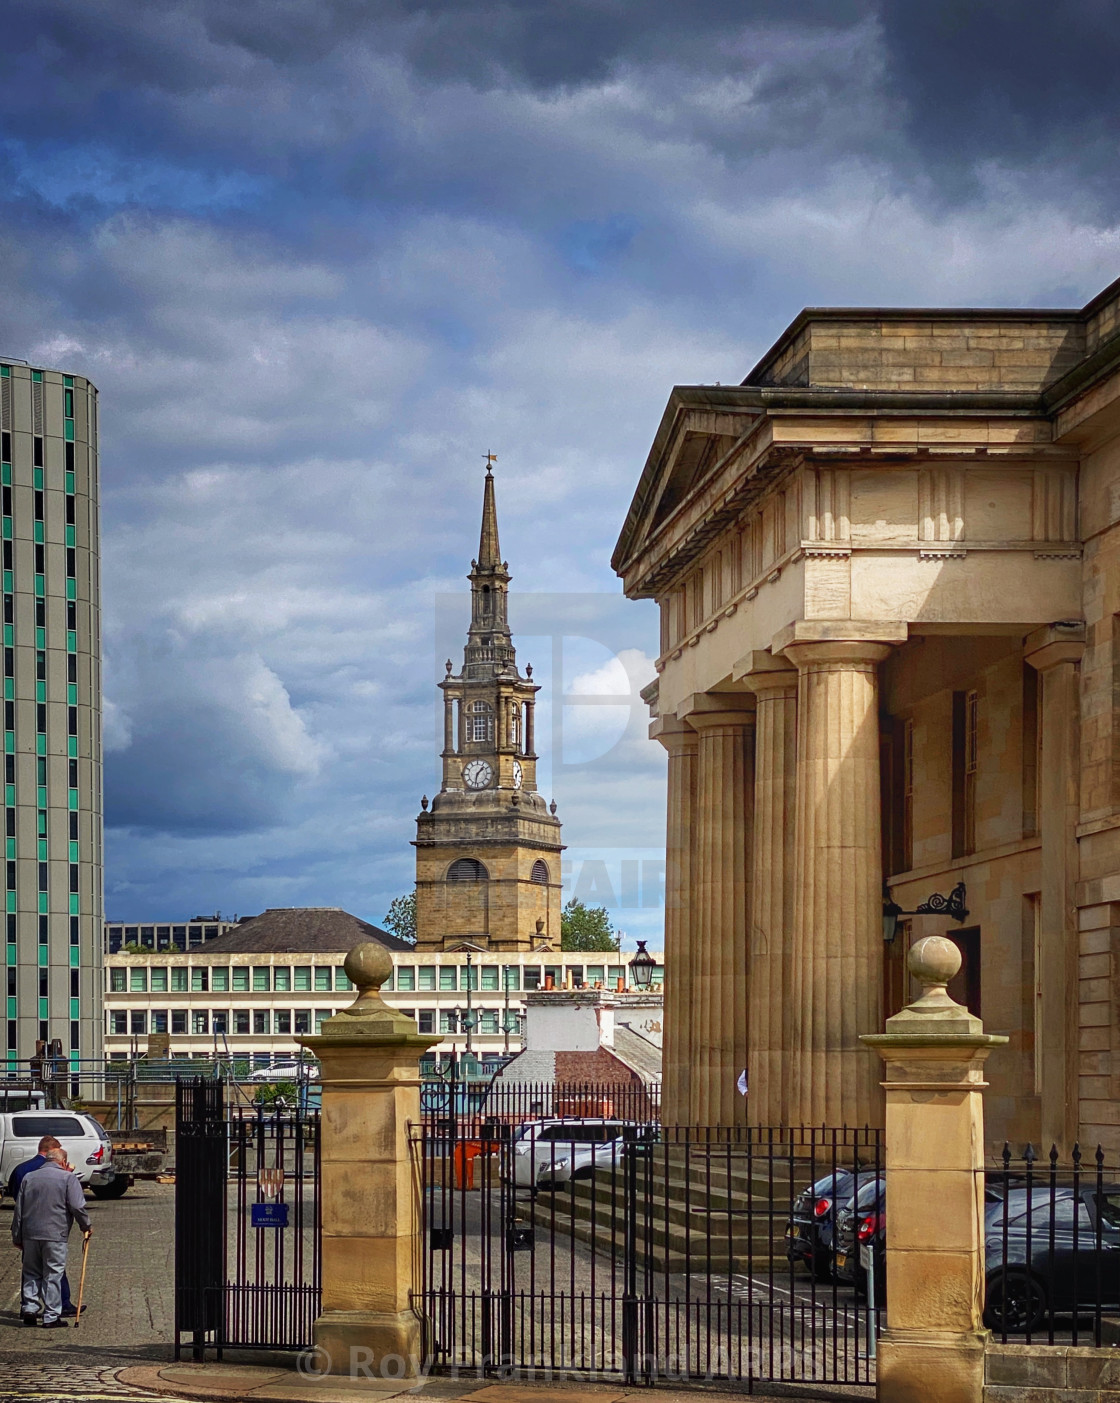 "Newcastle, The old town" stock image